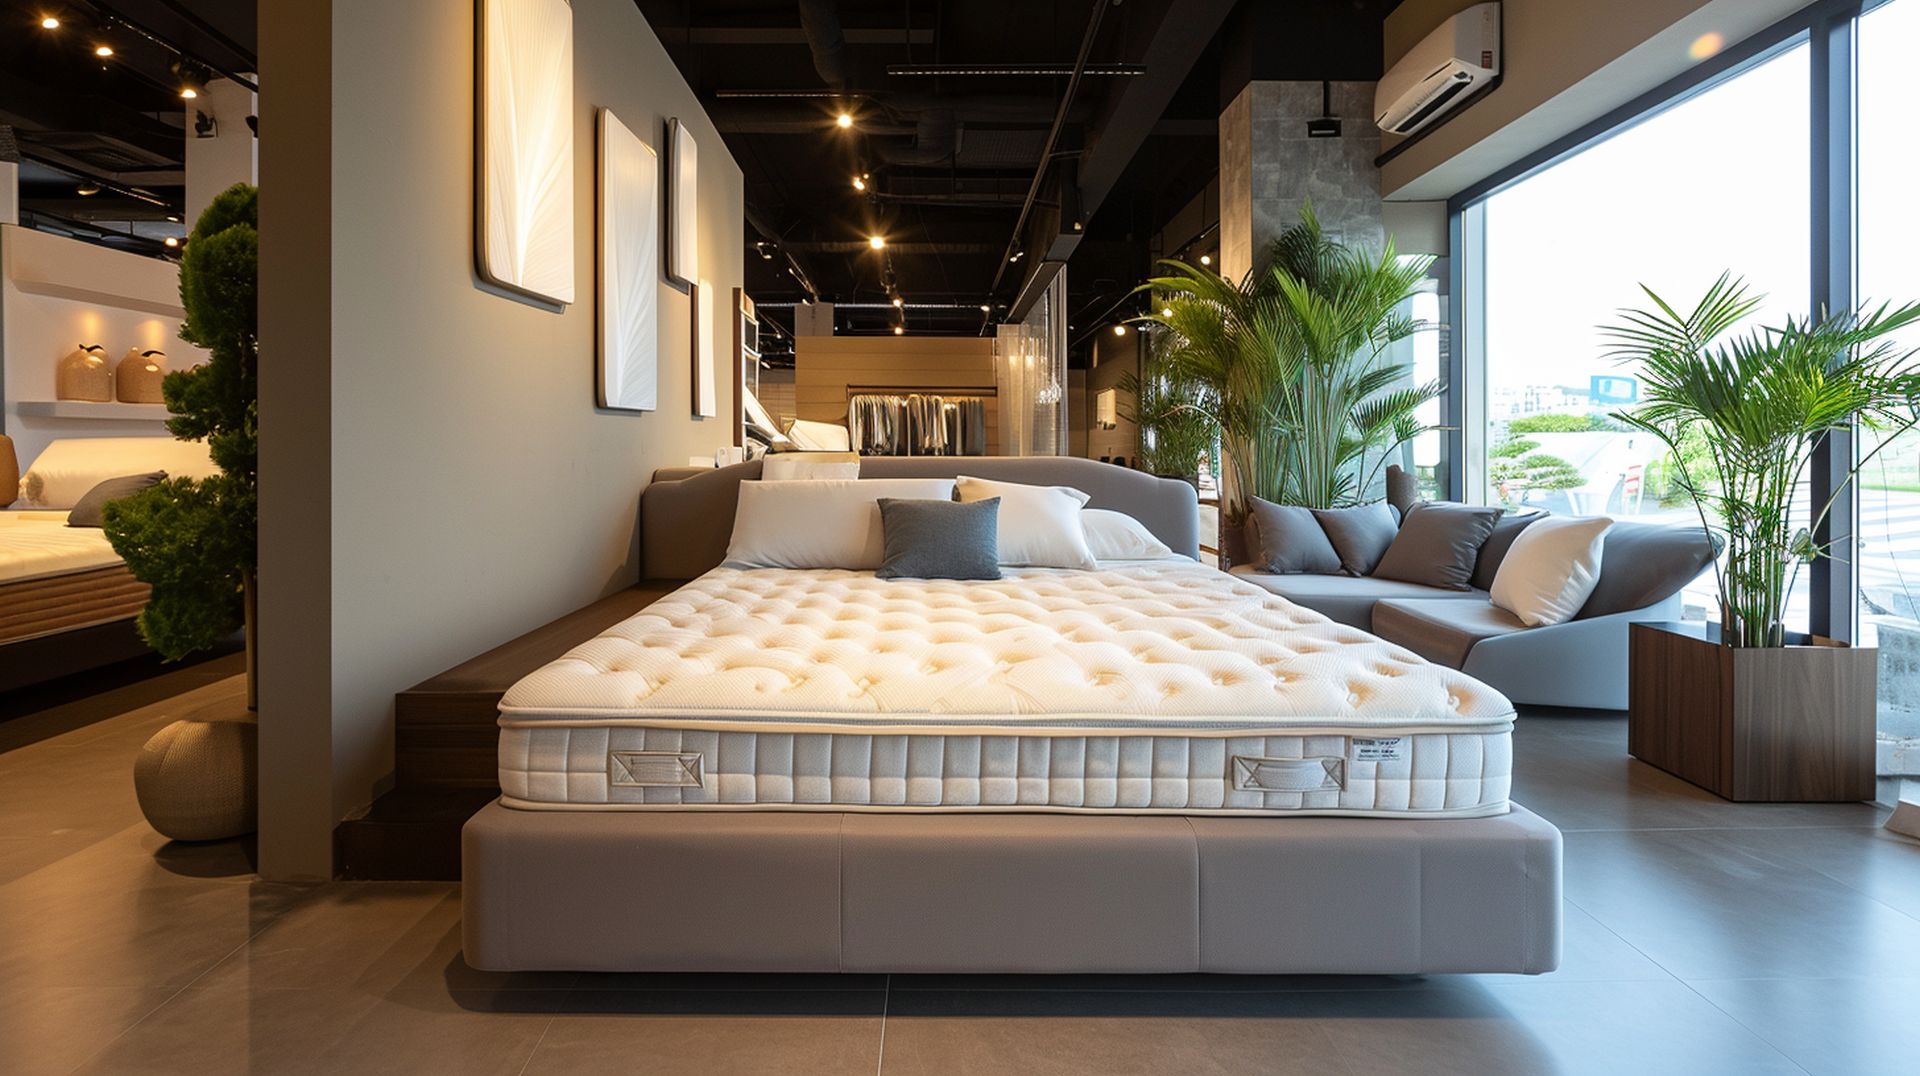 Types of mattresses at mattress dealers in Hamilton, OH